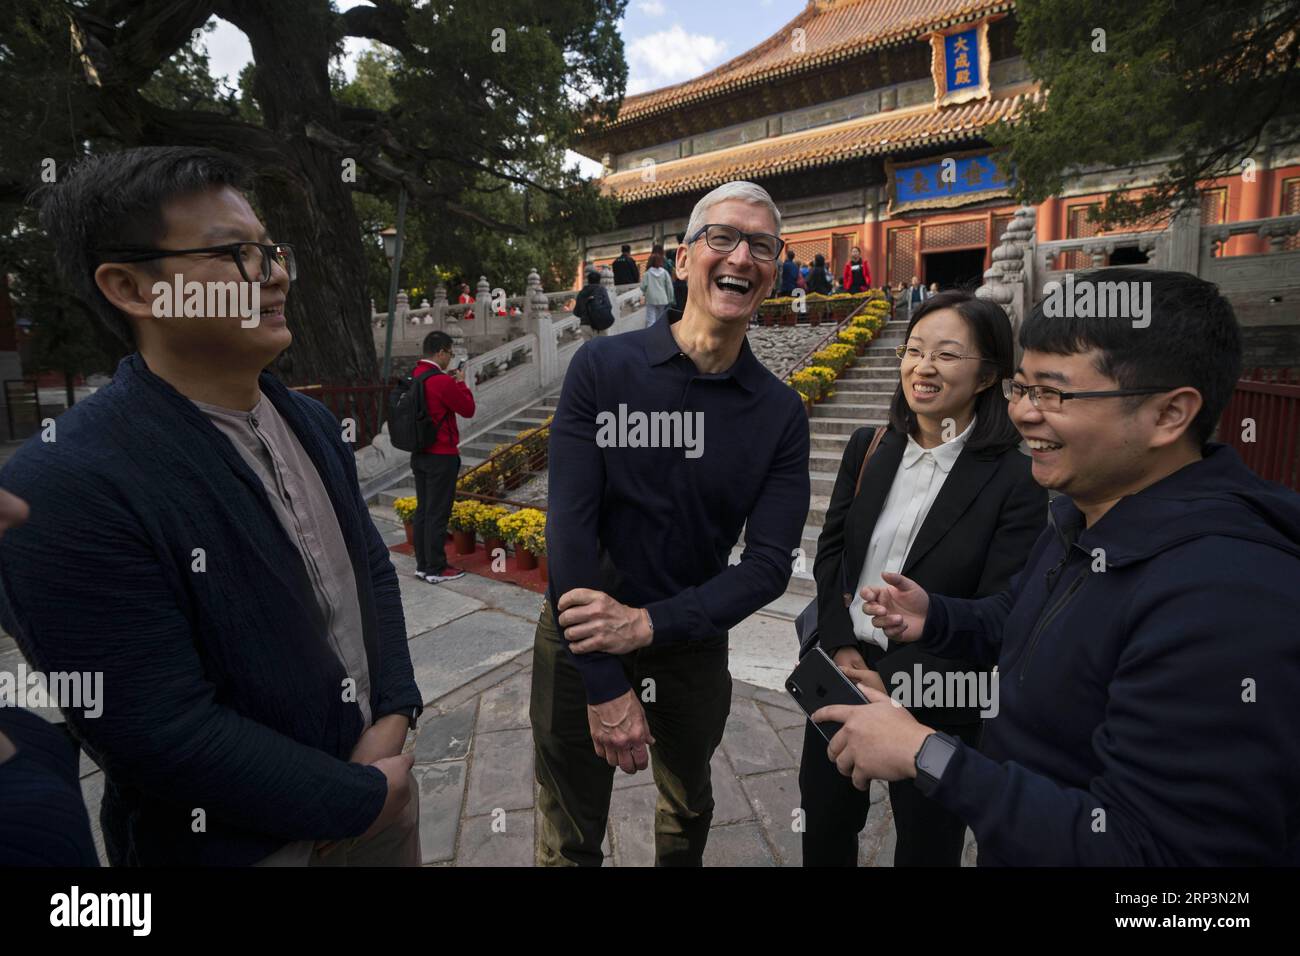 (181011) -- BEIJING, Oct. 11, 2018 -- Apple s CEO Tim Cook (2nd, L) talks with Qu Zhangcai (1st L) and Liu Zhipeng (1st R), founders of Xichuangzhu APP, at Beijing Confucian Temple in Beijing, capital of China, on Oct. 10, 2018. Cook paid a visit to Beijing Confucian Temple and the Imperial College on Wednesday. ) (sxk) CHINA-BEIJING-APPLE CEO-COOK-VISIT (CN) CaixYang PUBLICATIONxNOTxINxCHN Stock Photo